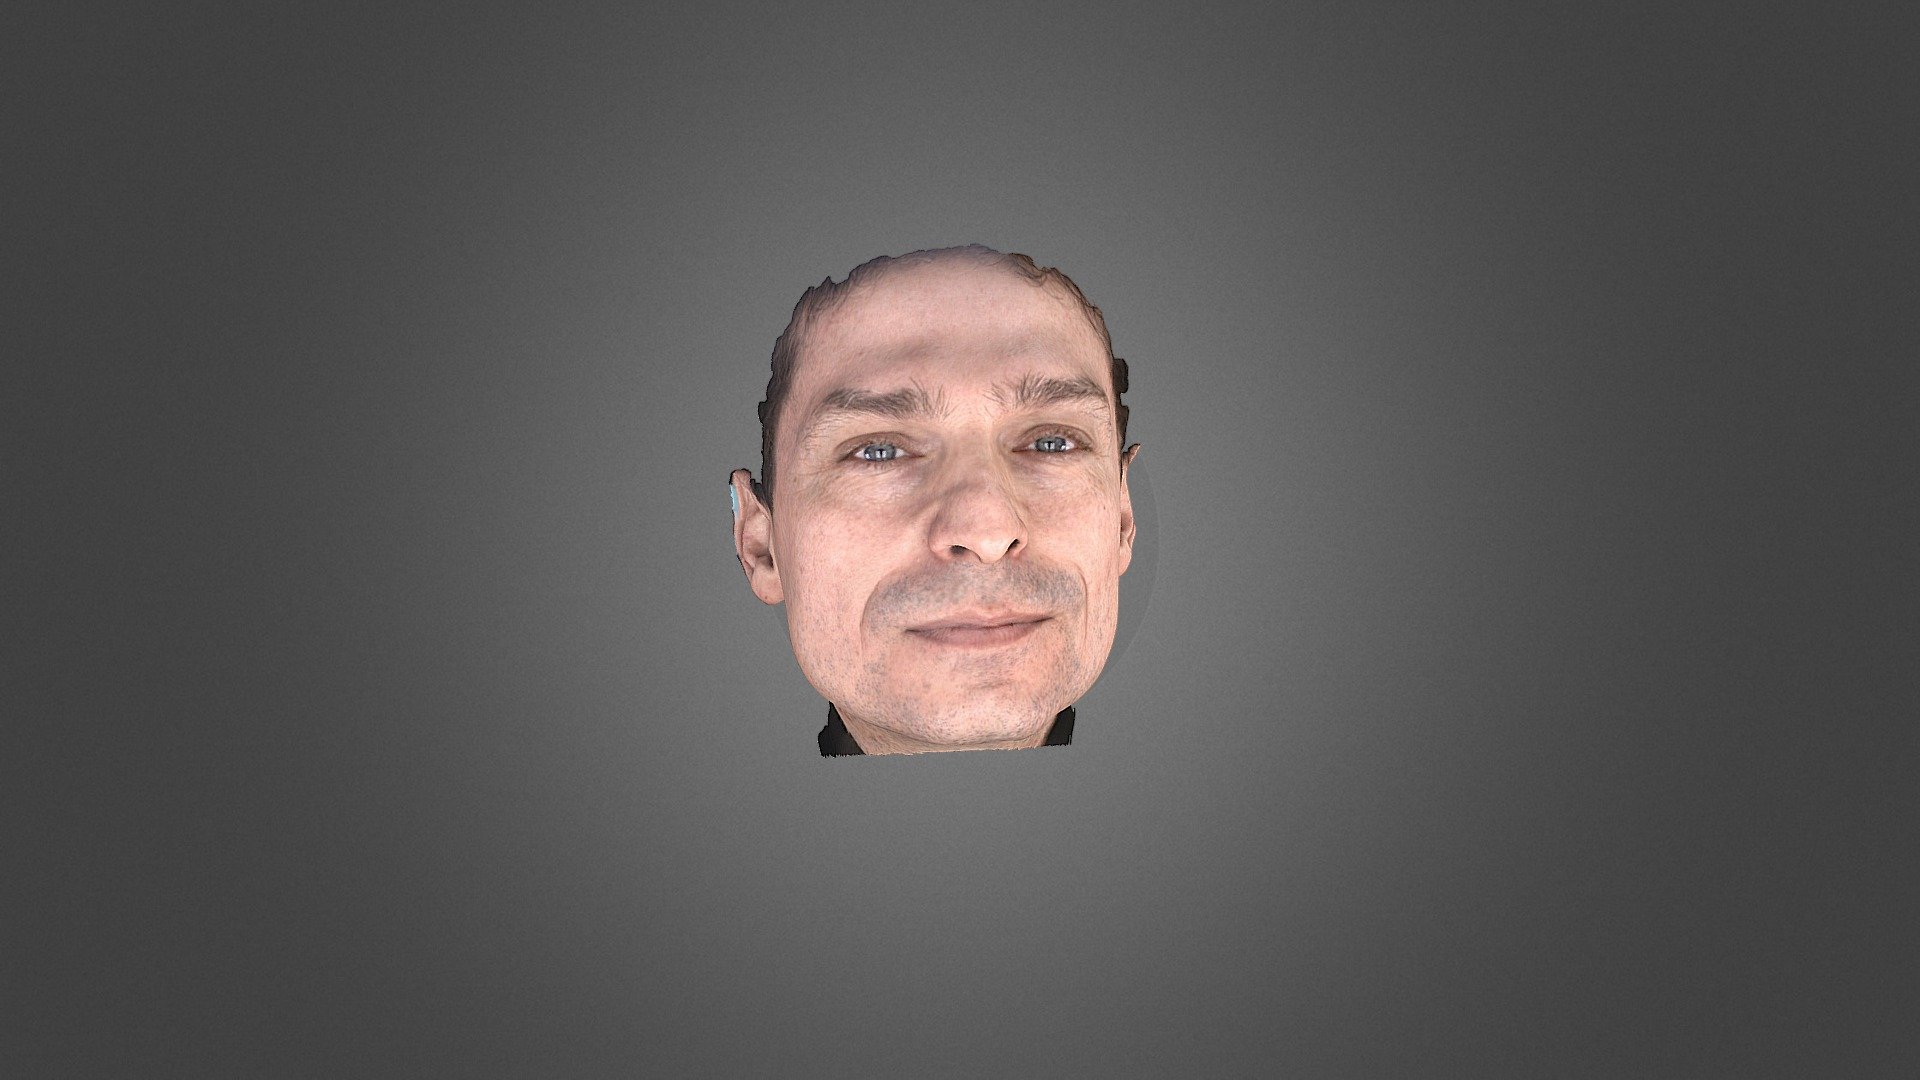 This face model is scanned with our Fasense product. Facense is a lightweight and portable depth camera used for capturing accurate 3D face model. Multiple cameras can be flexibly combined to collect and capture human face data from different angles in seconds. You may add more cameras to capture a 360° face model. The infrared light won’t cause any damage to human eye. With the proprietary algorithm and MEMS chip, it can get stable and reliable real-time depth information of the face, with the maximum model accuracy up to 0.1mm.For more information, please go to:https://www.revopoint3d.com/3d-face-scanner-facense-f3/ - 3D Face scanner Facense Model: Man - 3D model by Revopoint 3D (@Revopoint3d) 3d model